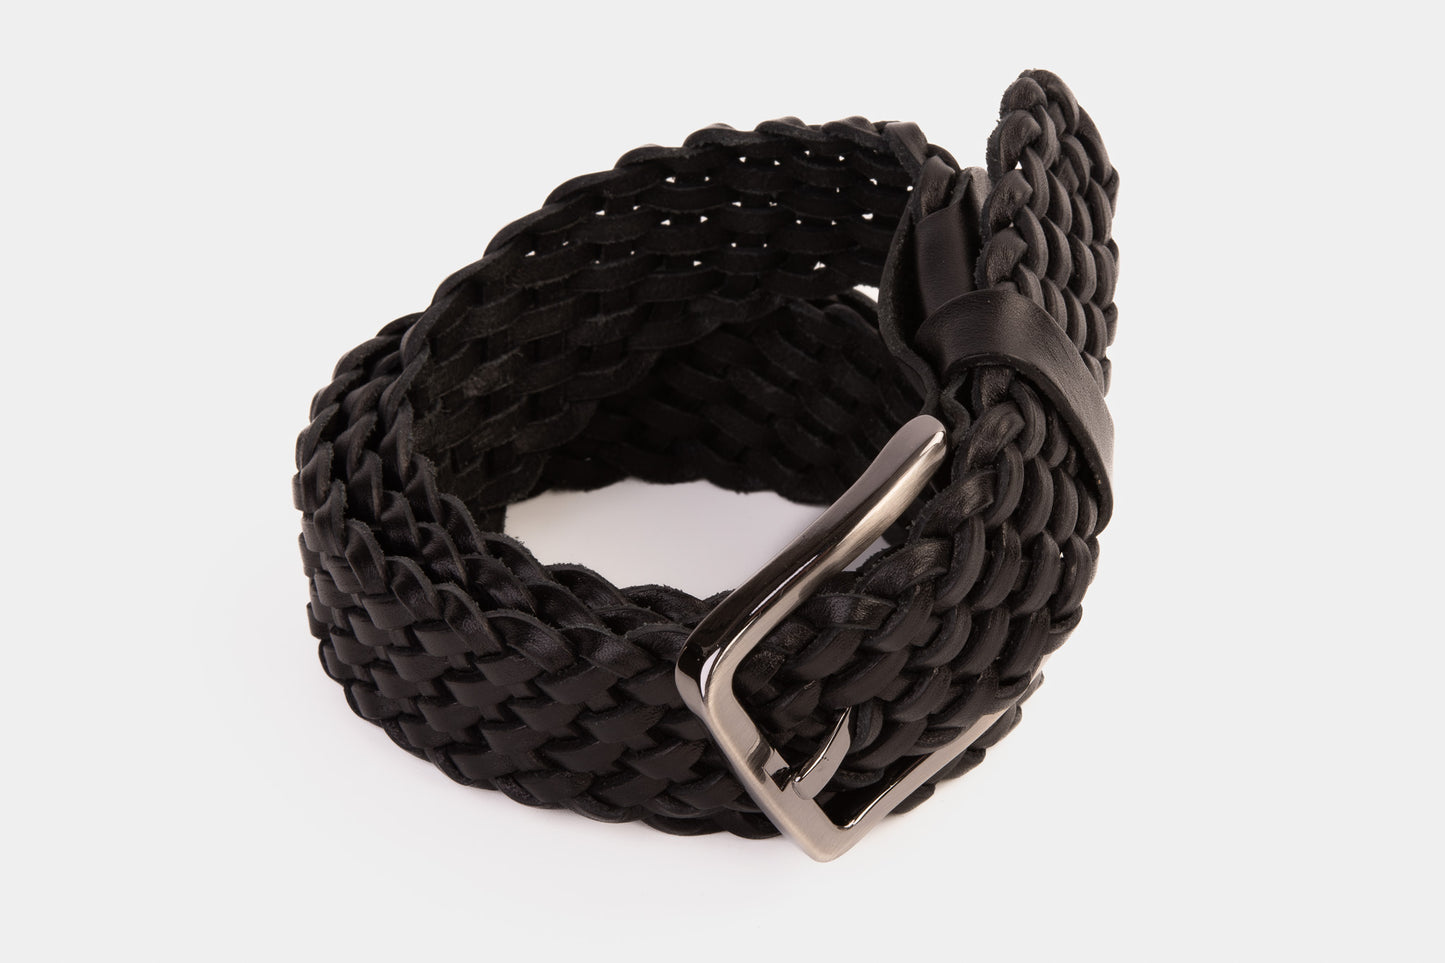 The Grand Woven Black Color Leather Belt